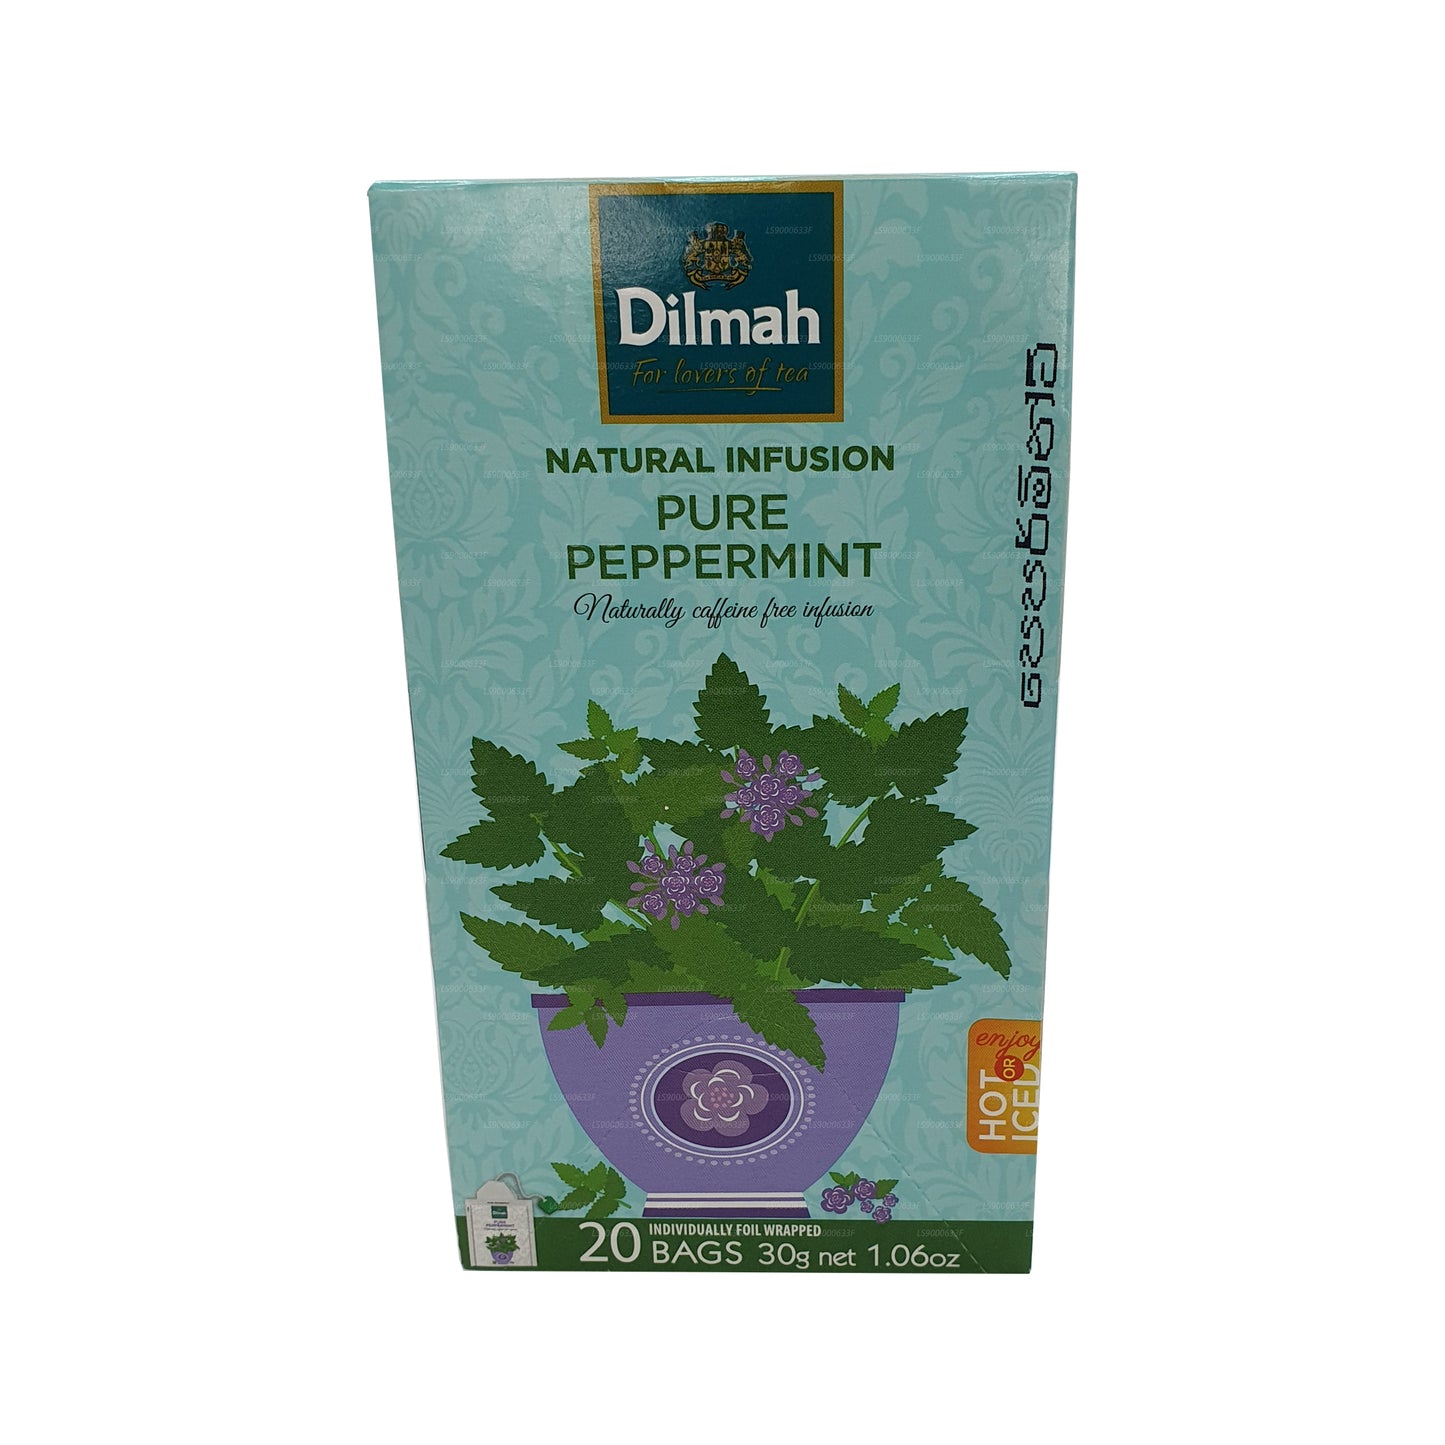 Dilmah Natural Infusion Pure Peppermint (30g) 20 Tea Bags